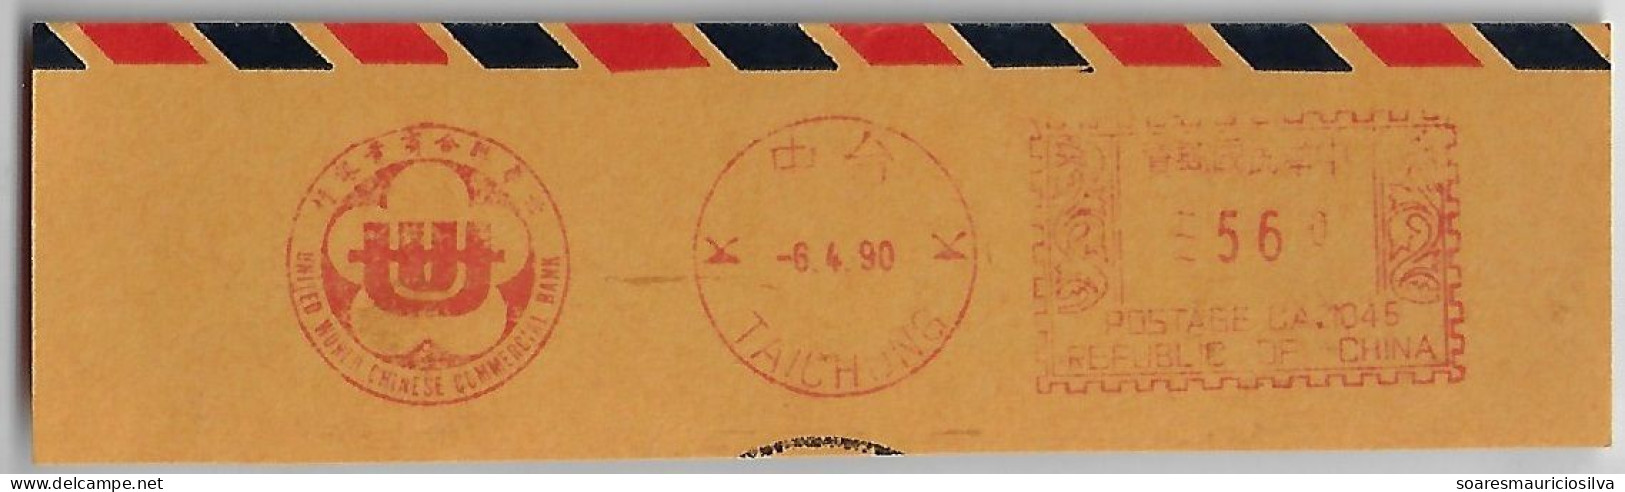 Taiwan 1990 Fragment Meter Stamp Pitney Bowes Slogan United World Chinese Commercial Bank Taichung Flower Plum Blossom - Briefe U. Dokumente